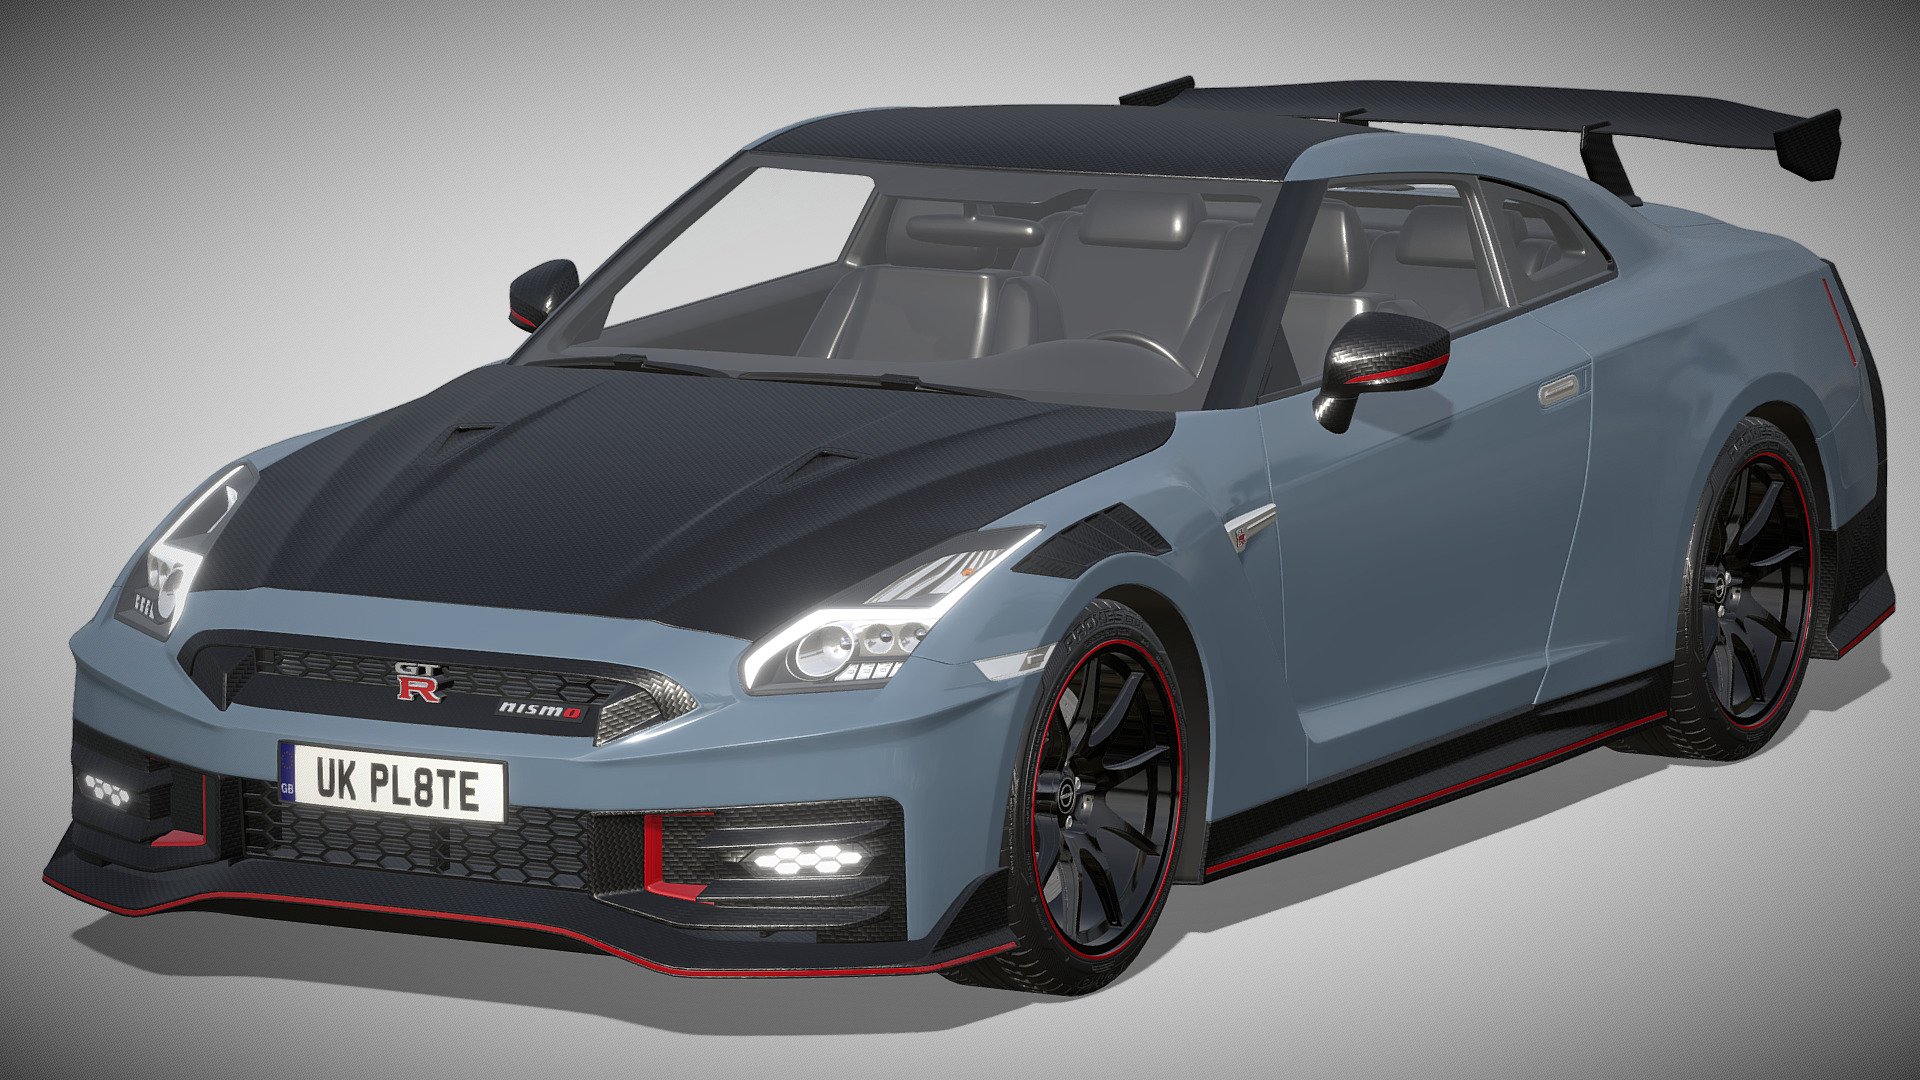 Nissan GT-R Nismo 2024

https://www.nissanusa.com/vehicles/sports-cars/gt-r/specs/nismo.html

Clean geometry Light weight model, yet completely detailed for HI-Res renders. Use for movies, Advertisements or games

Corona render and materials

All textures include in *.rar files

Lighting setup is not included in the file! - Nissan GT-R Nismo 2024 - Buy Royalty Free 3D model by zifir3d 3d model